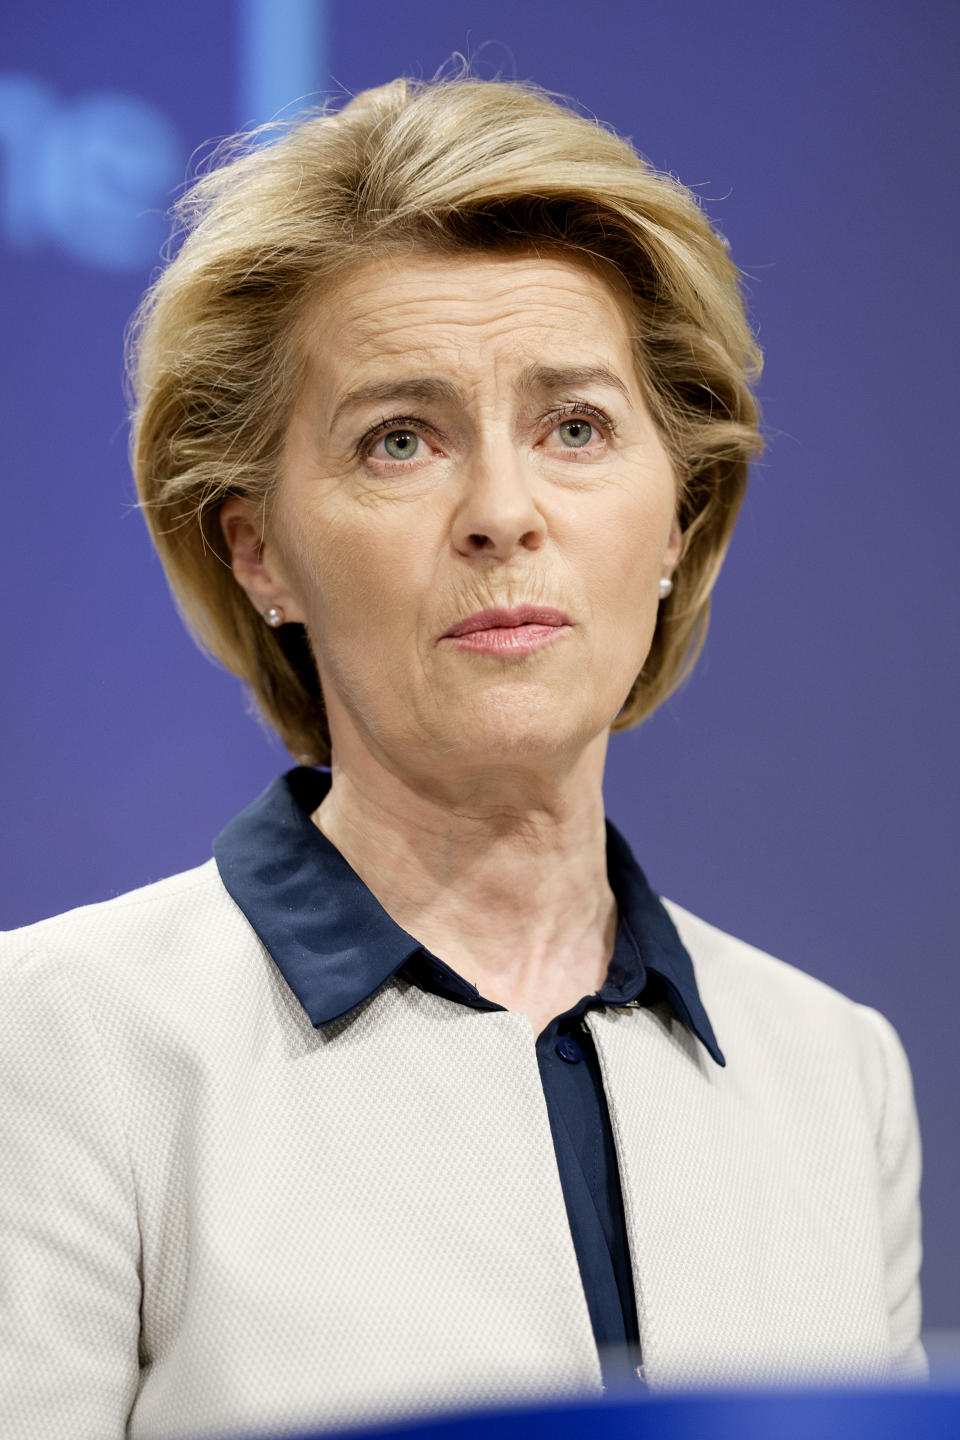 European Commission President Ursula von der Leyen speaks during a media conference at EU headquarters in Brussels, Friday, March 13, 2020. The European Union on Friday urged member countries to put in place health screening measures at their borders to slow the spread of the novel coronavirus, but warned them to coordinate their actions to ensure that people affected can still quickly get the health care they need. For most people, the new coronavirus causes only mild or moderate symptoms, such as fever and cough. For some, especially older adults and people with existing health problems, it can cause more severe illness, including pneumonia. (AP Photo/Thierry Monasse)